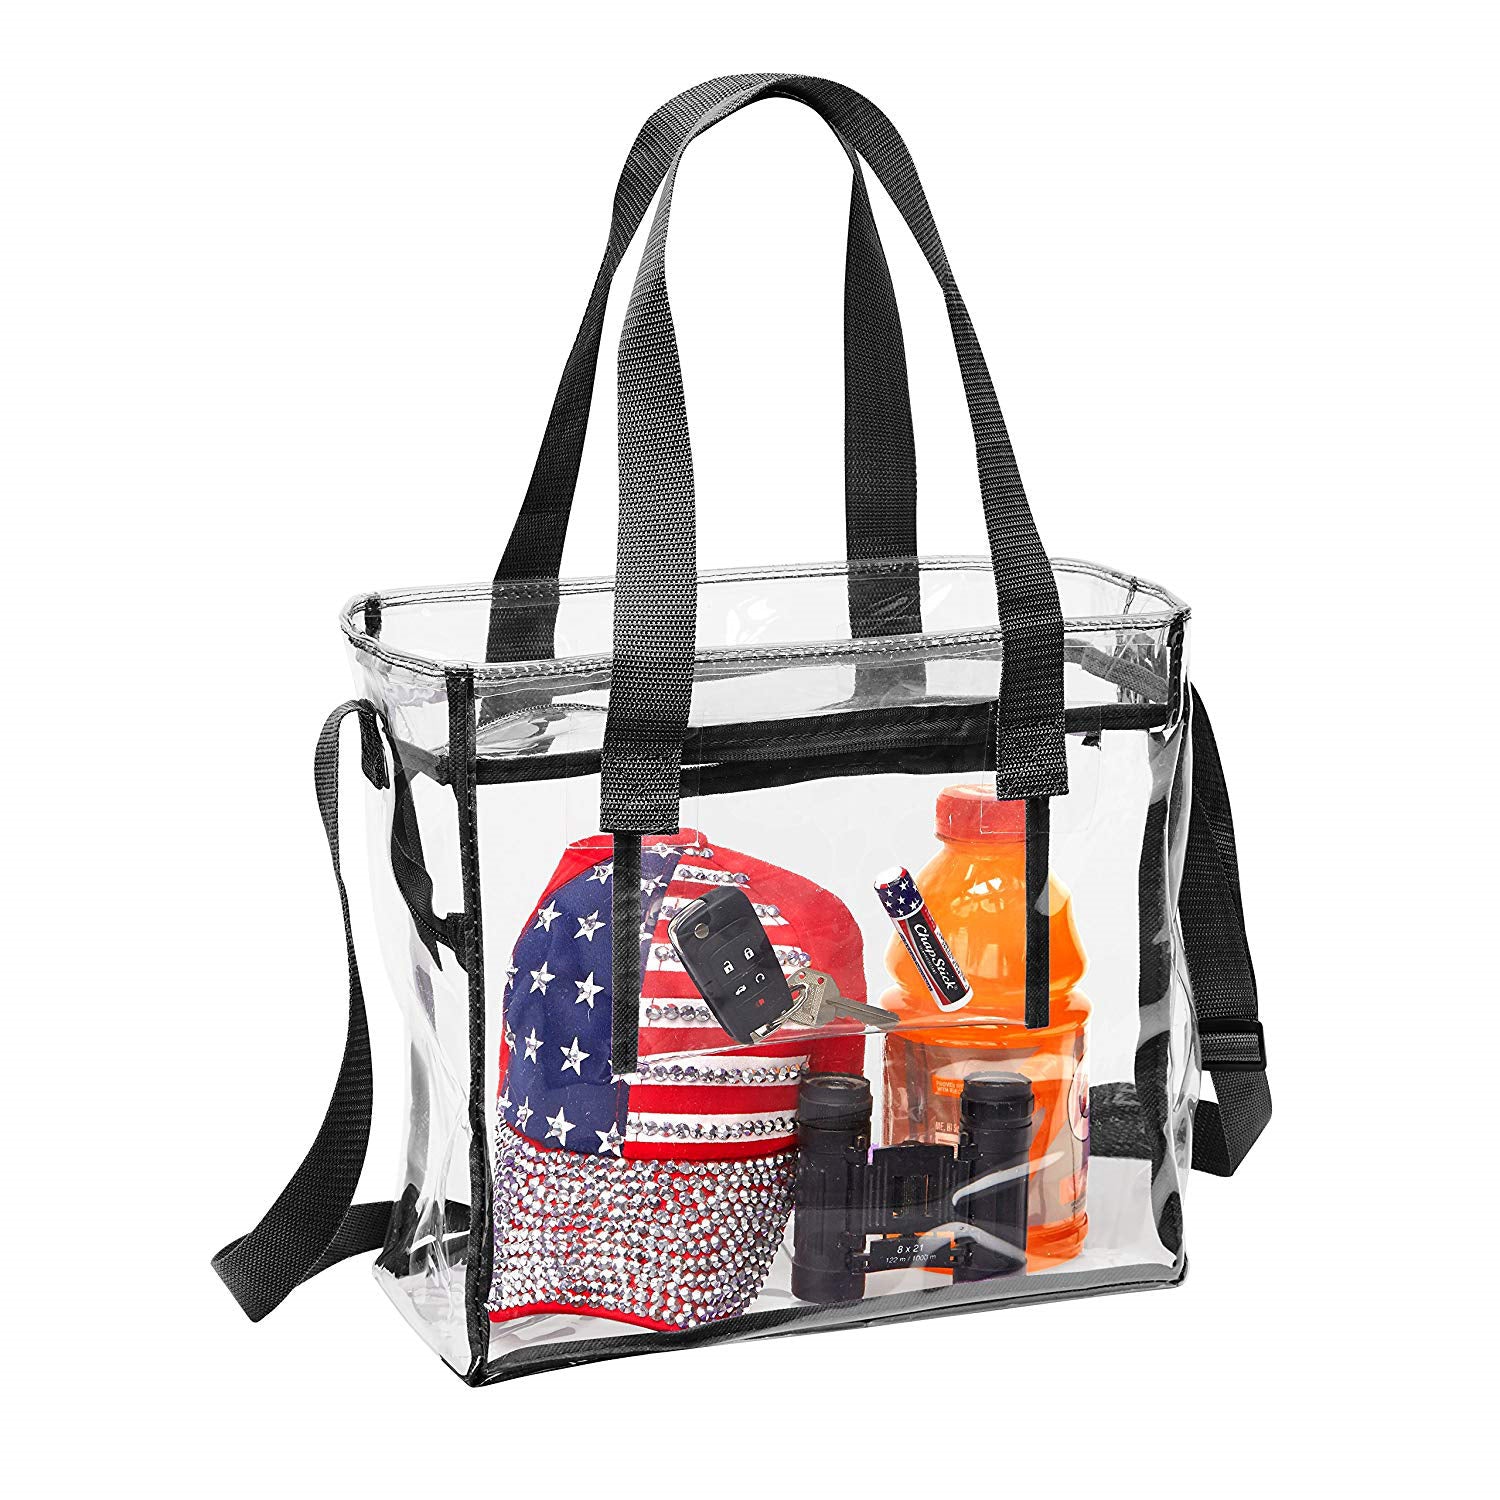 Clear Bag Stadium Approved Clear Tote Bag 12x12x6 For Sporting